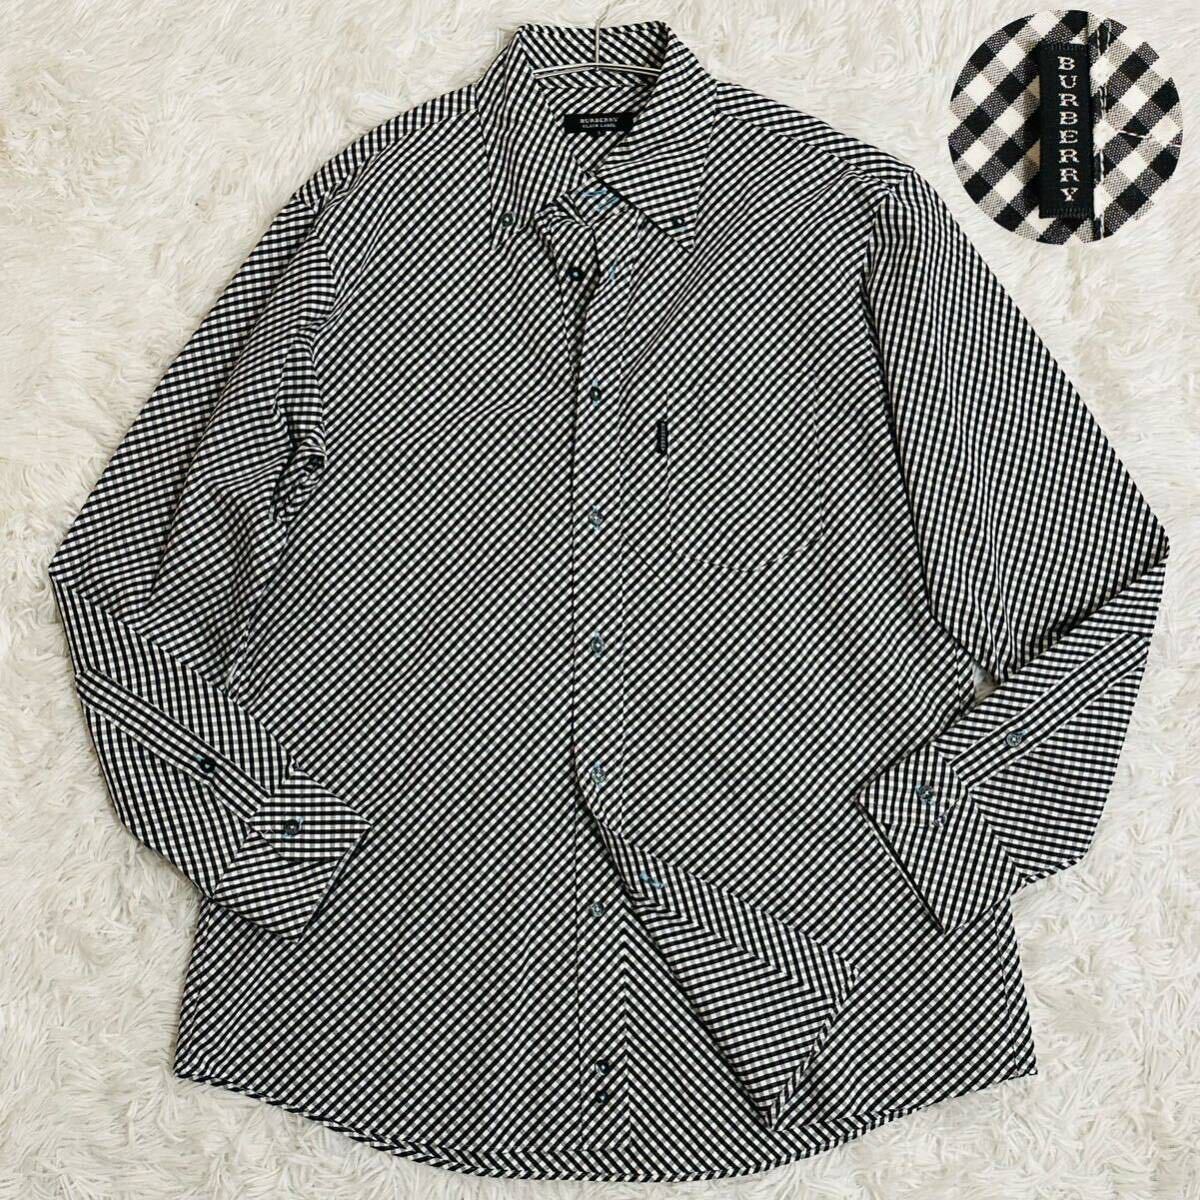  beautiful goods! rare L(3) absolute size XL rank Burberry Black Label long sleeve shirt silver chewing gum check du evo to-niBDpis name BURBERRY BLACK LABEL